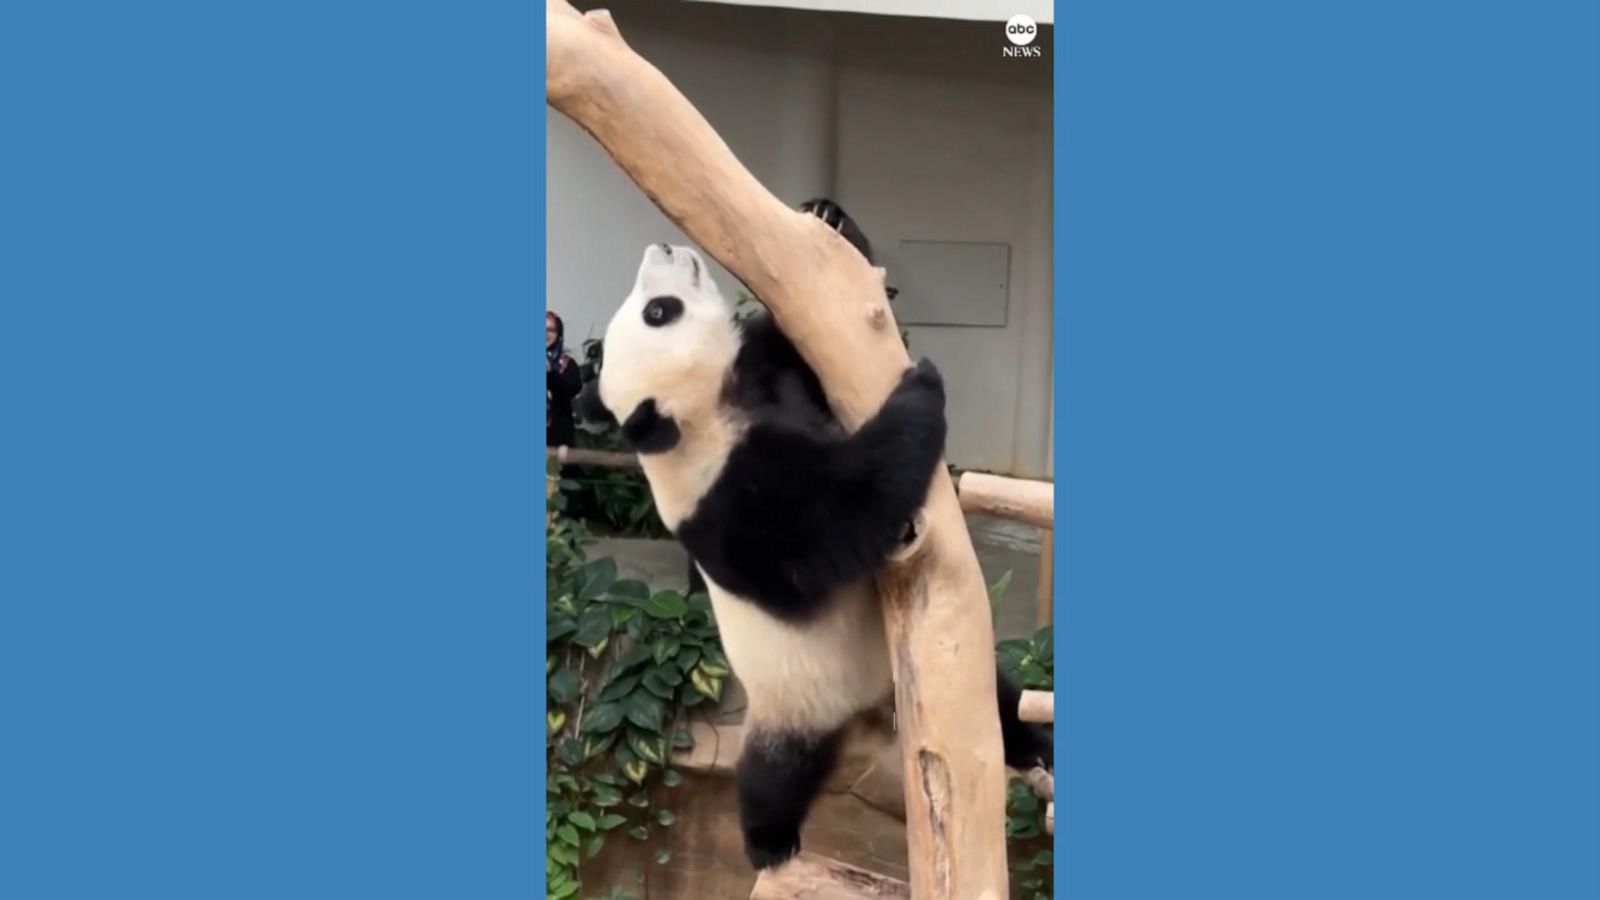 Giant panda shows off her skills at Malaysia zoo - Good Morning America